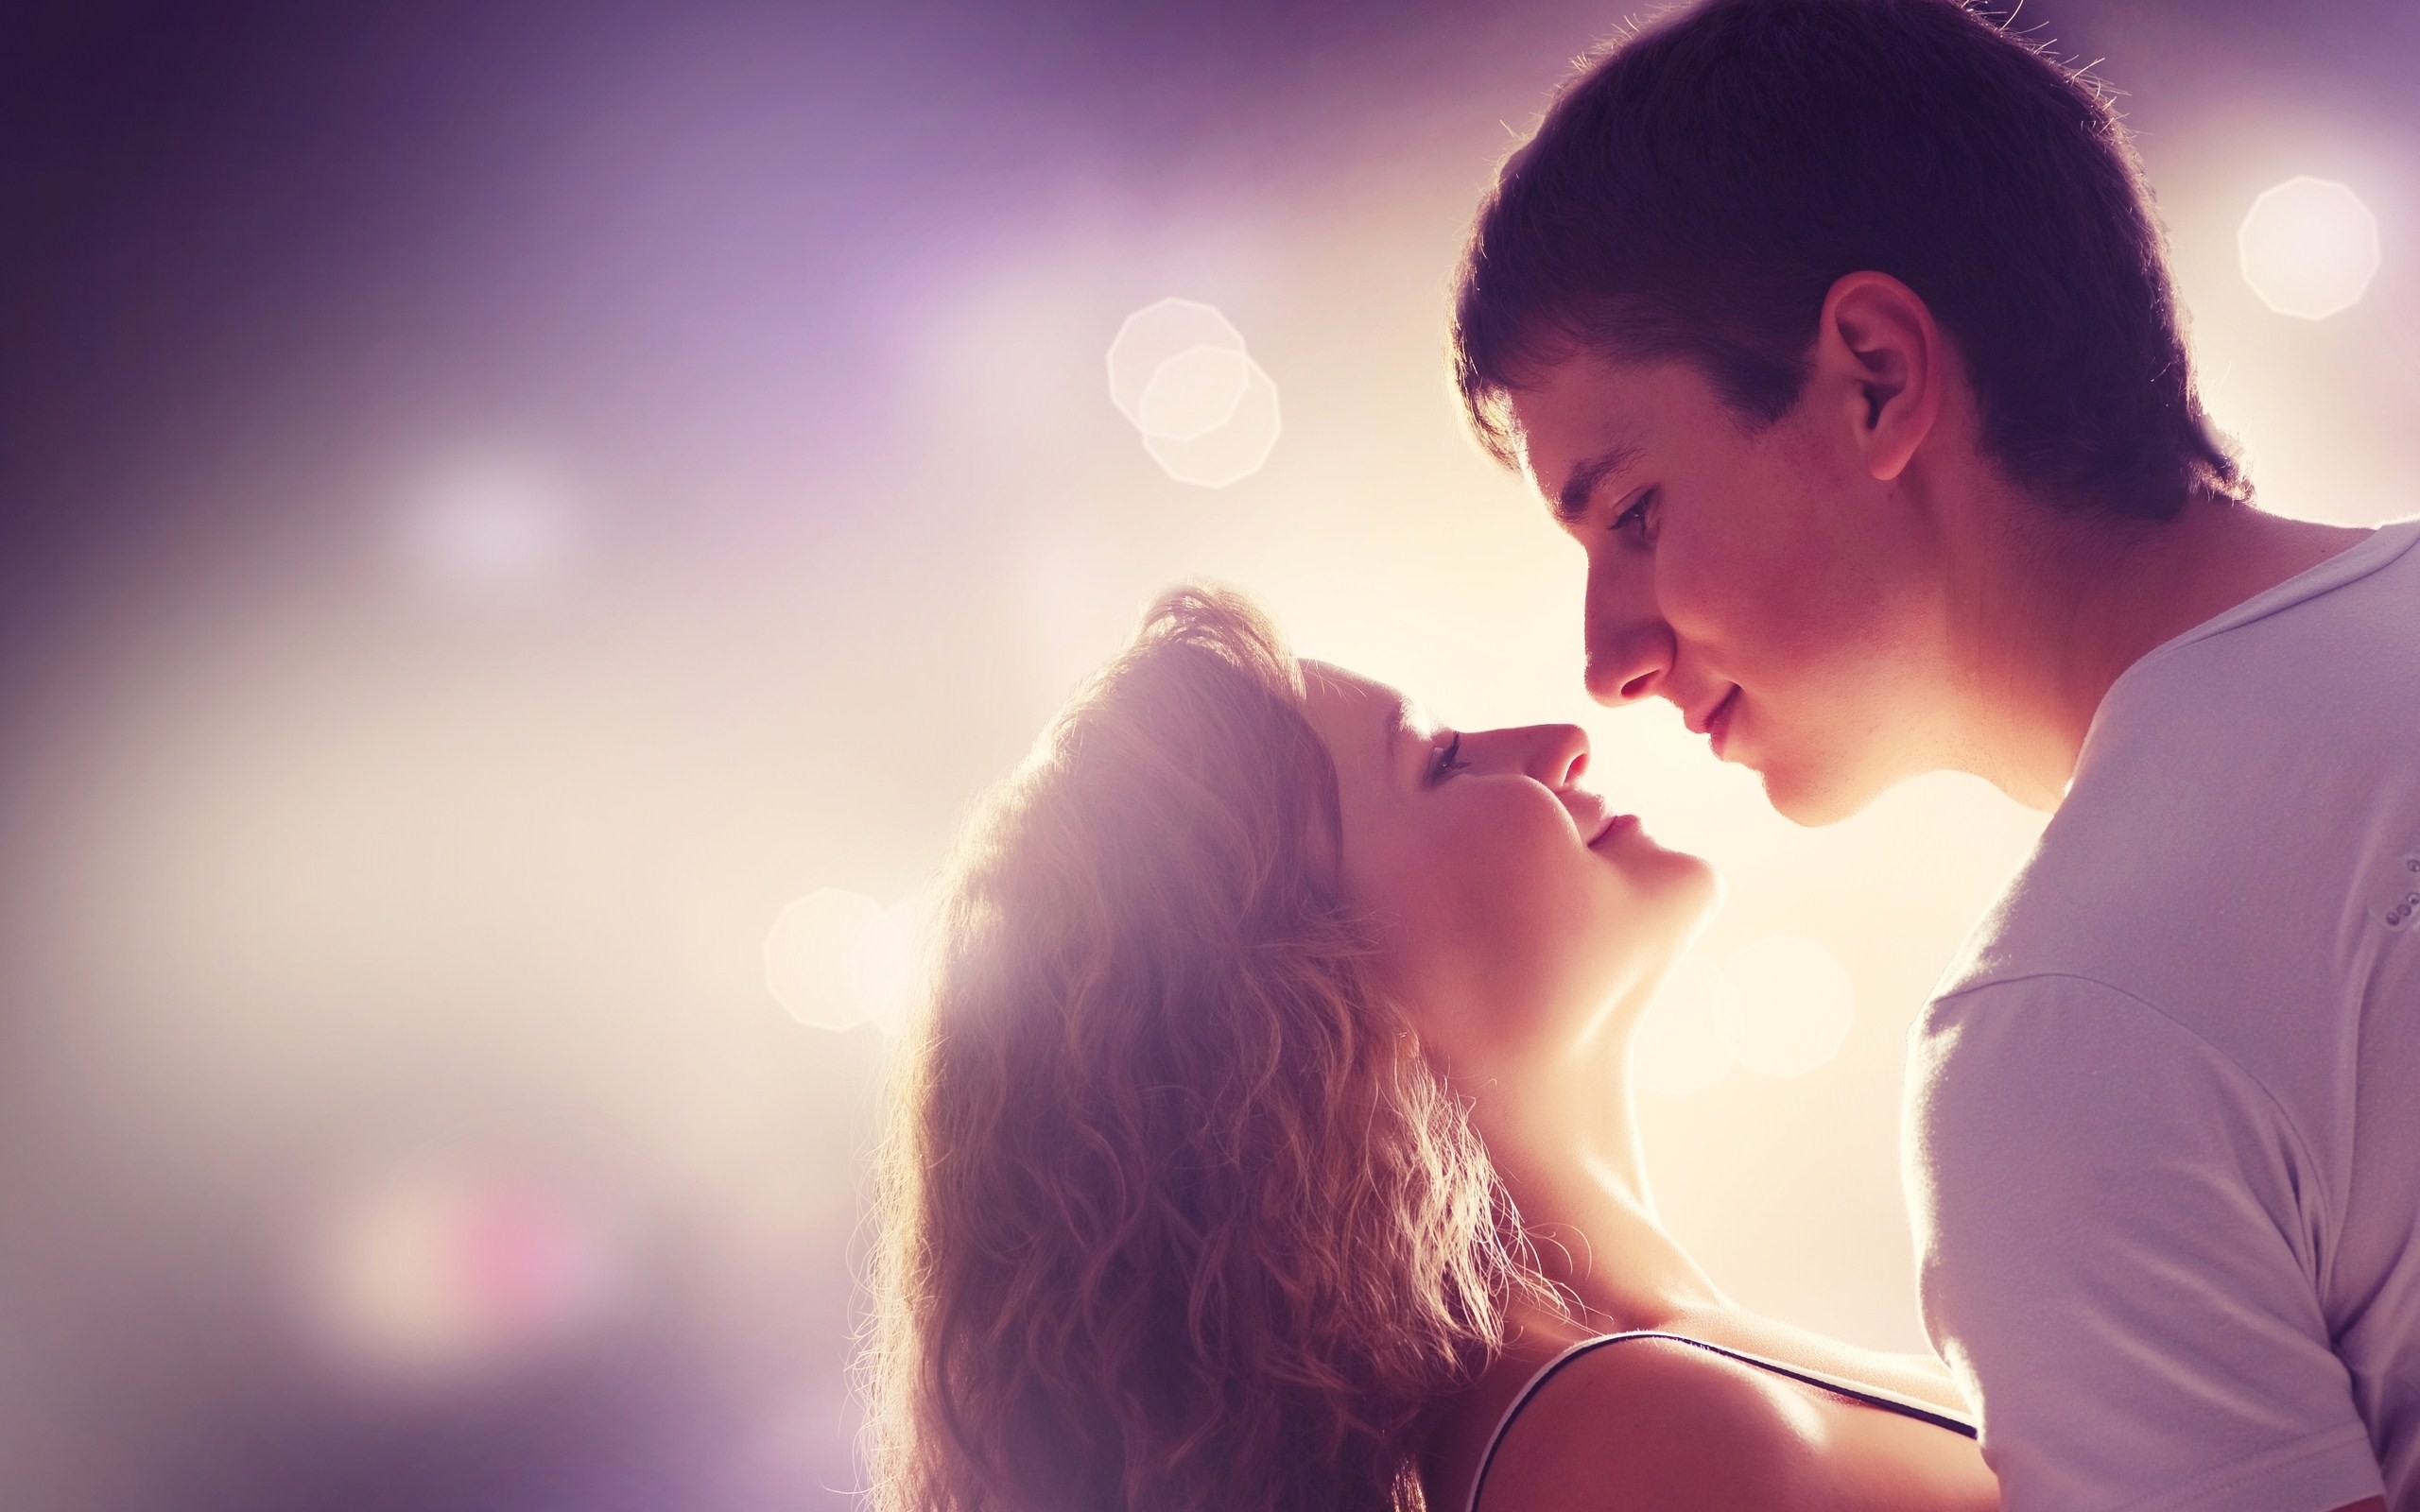 Boy & Girl Romantic Love Wallpapers Current Styles With Fashion Spot